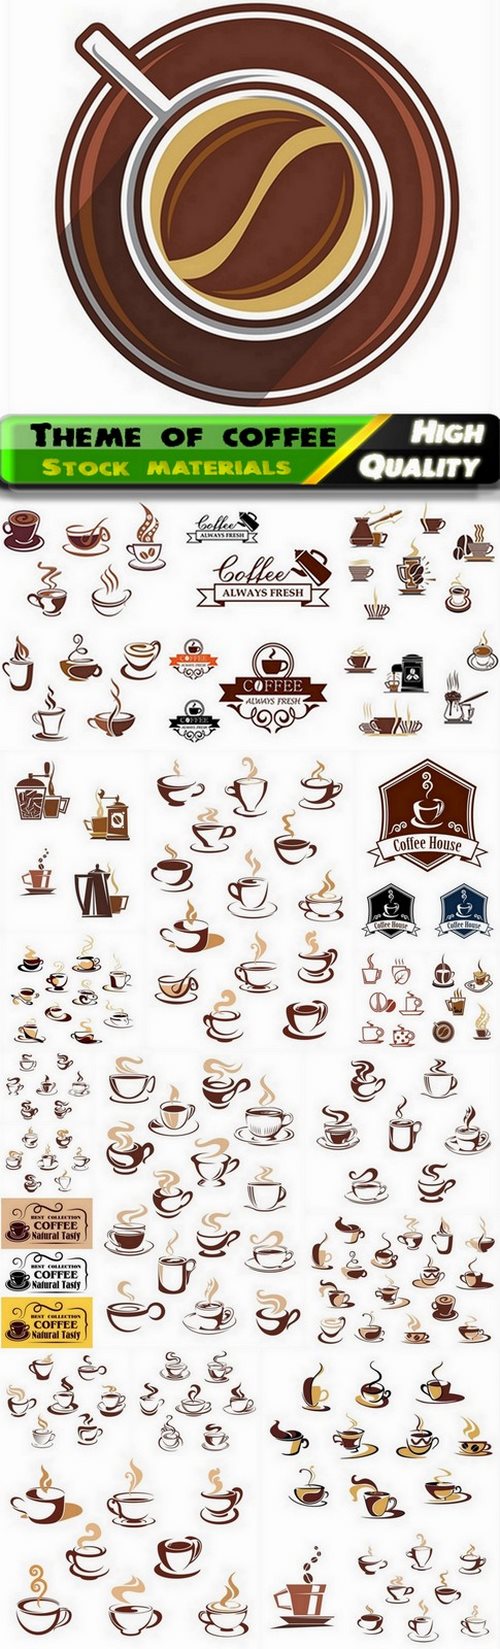 Logos labels and stamps with theme of coffee - 25 Eps